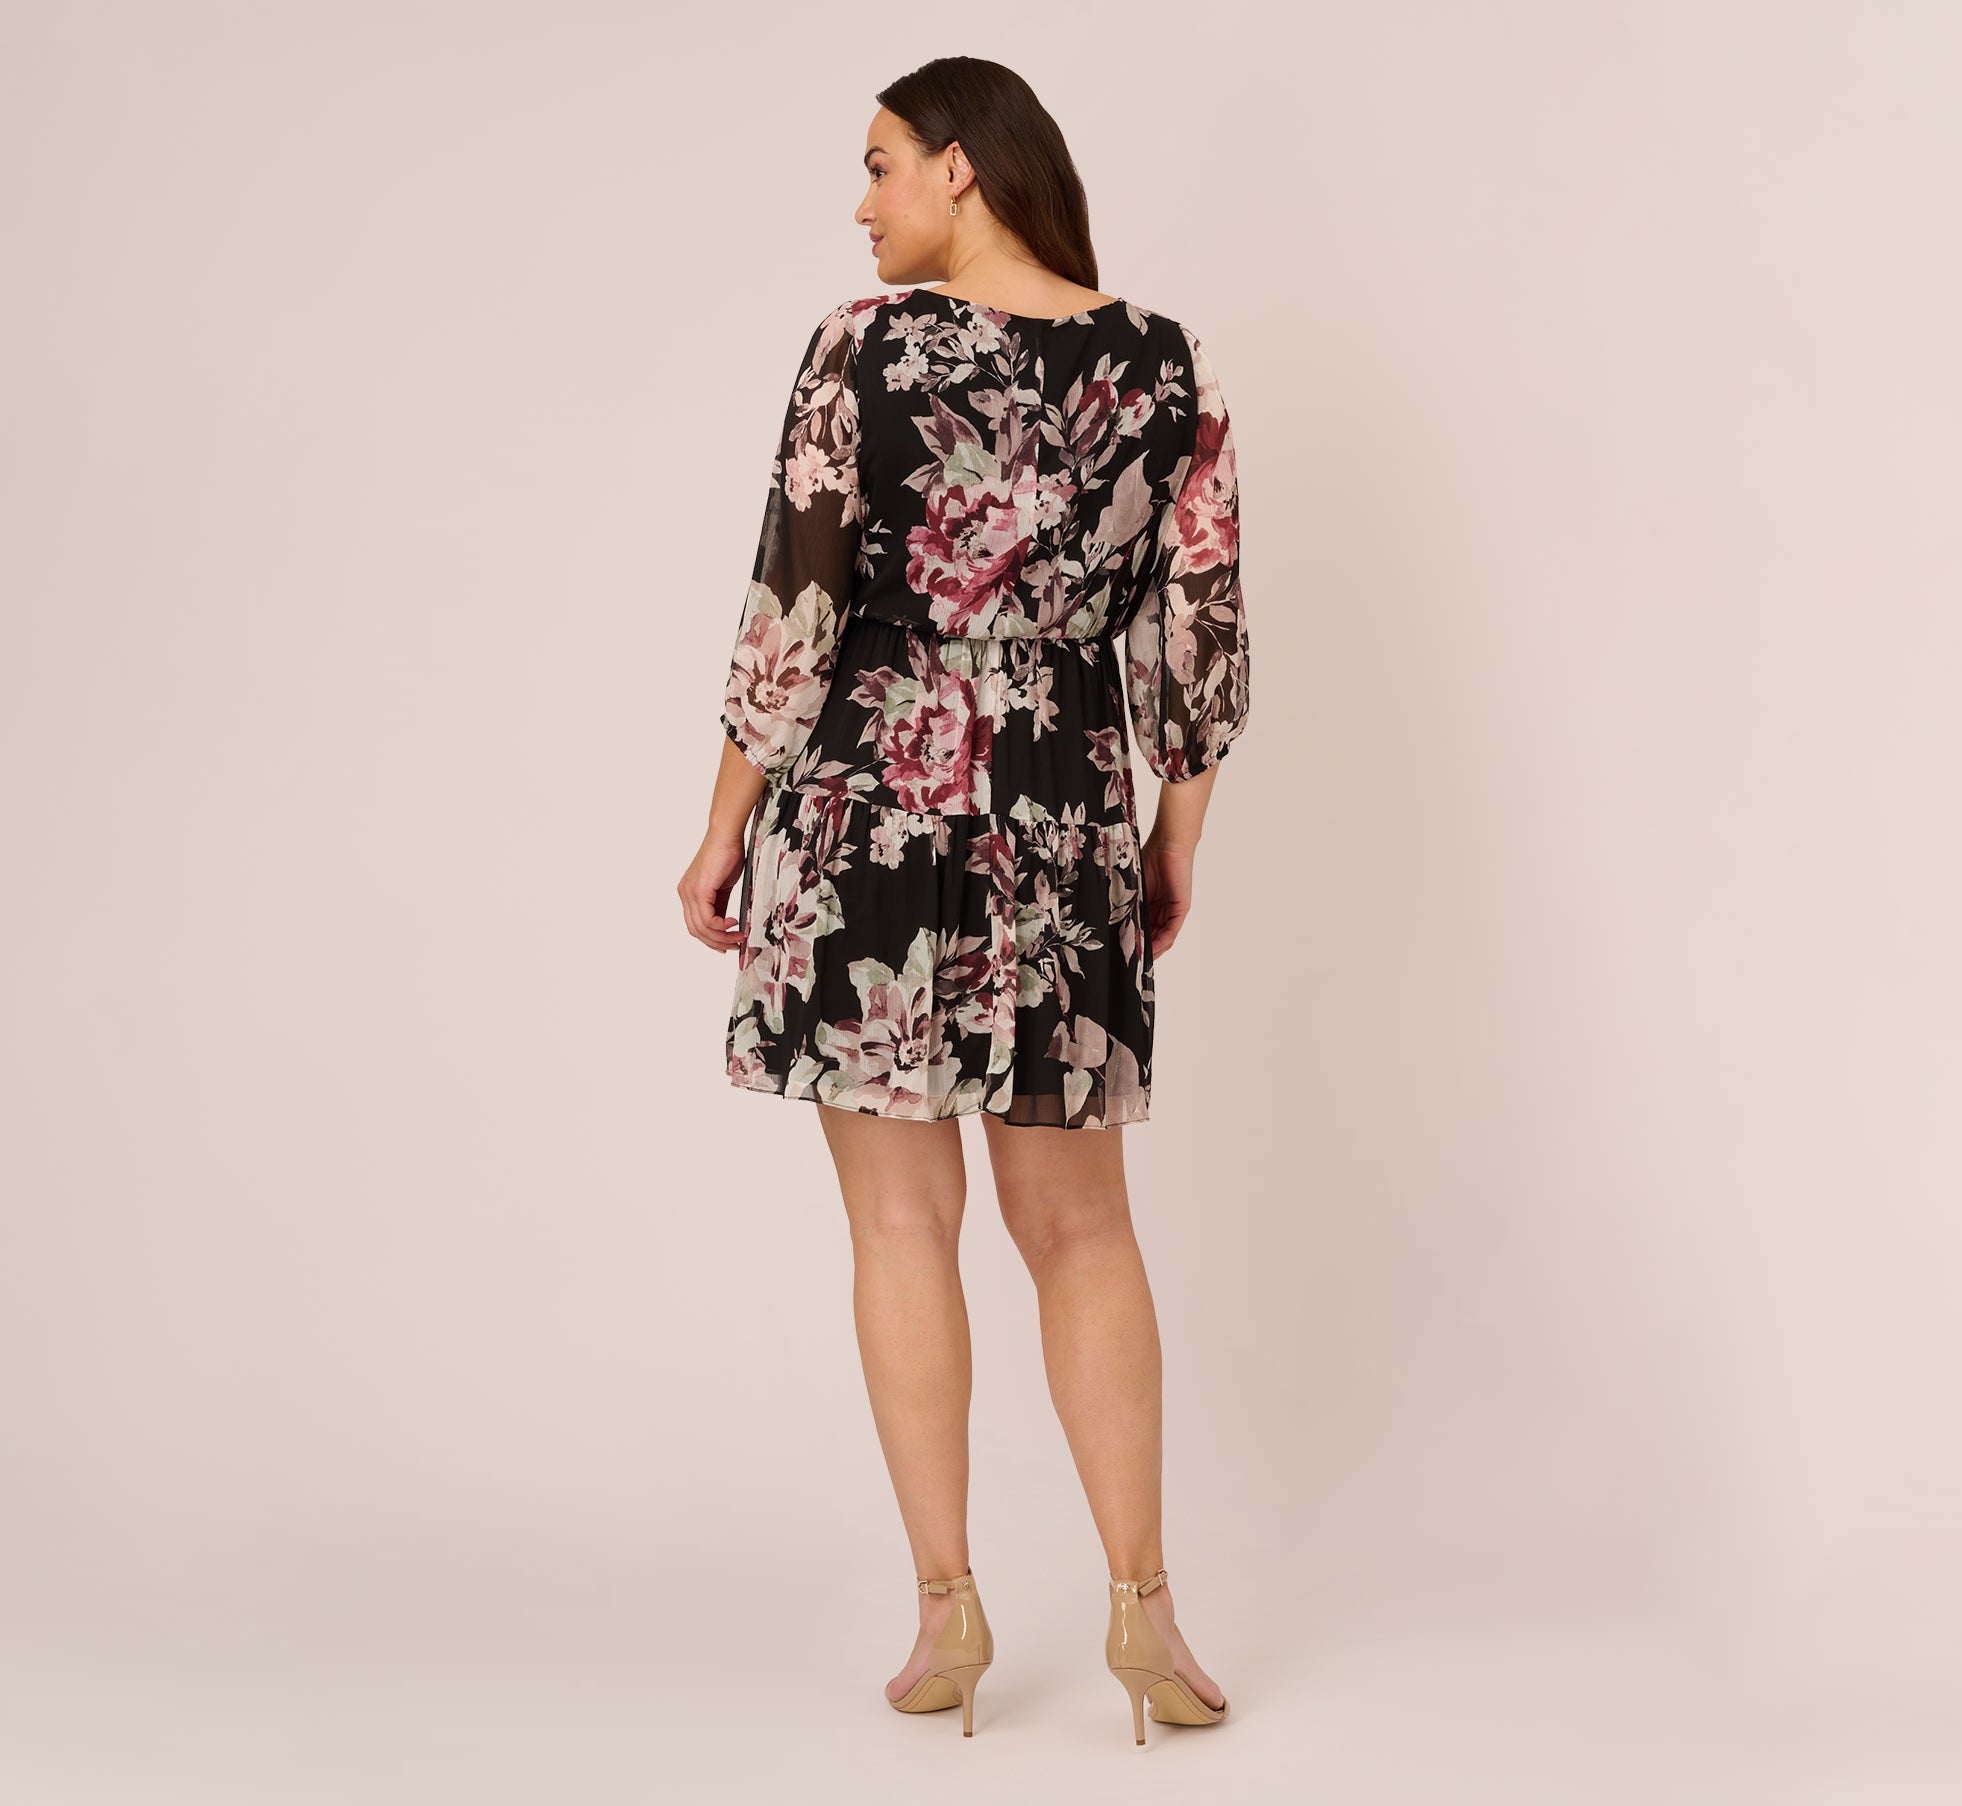 Plus Size Floral Chiffon Dress With Three Quarter Length Sleeves